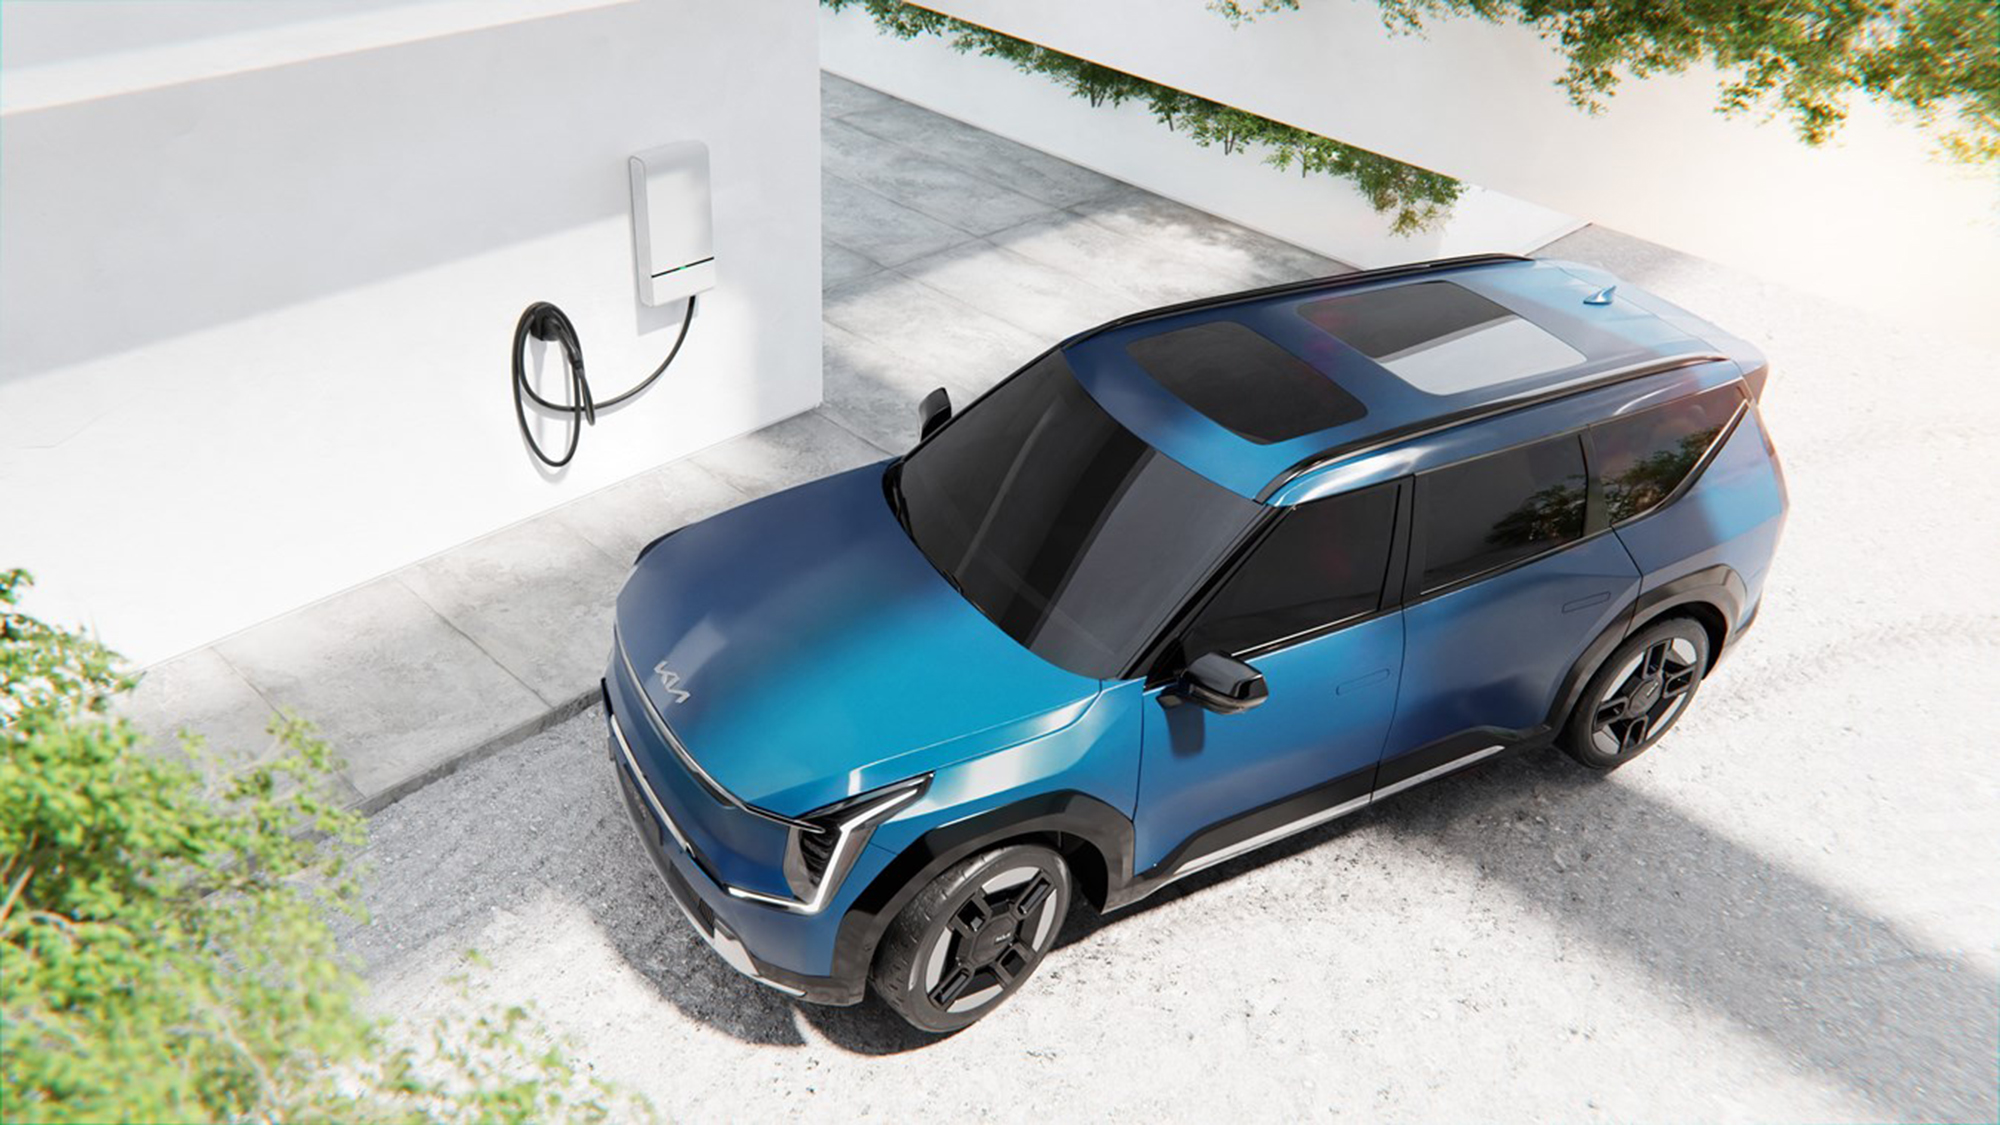 Kia’s EV9 can power an average home and then some